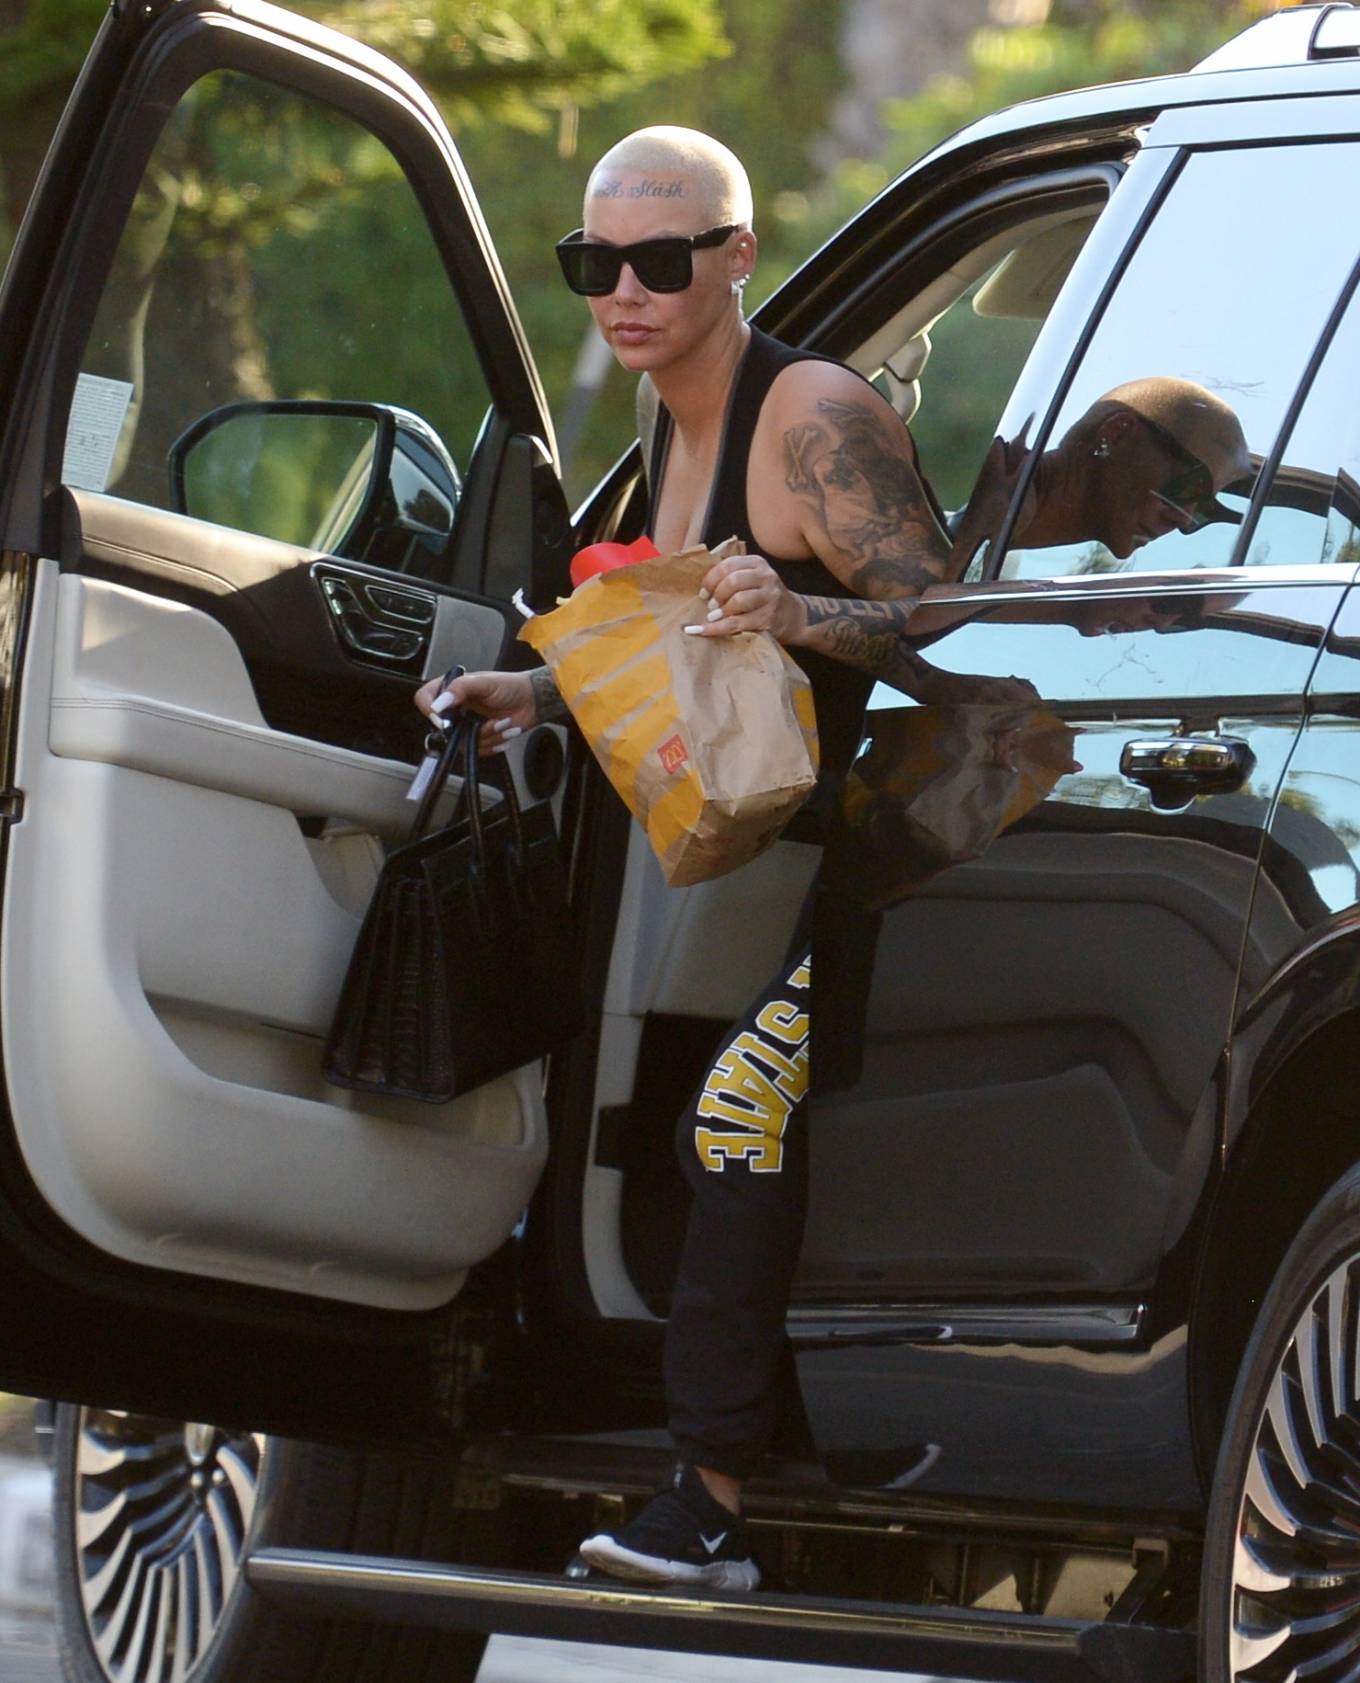 Amber Rose - Stopped at McDonald's in Los Angeles